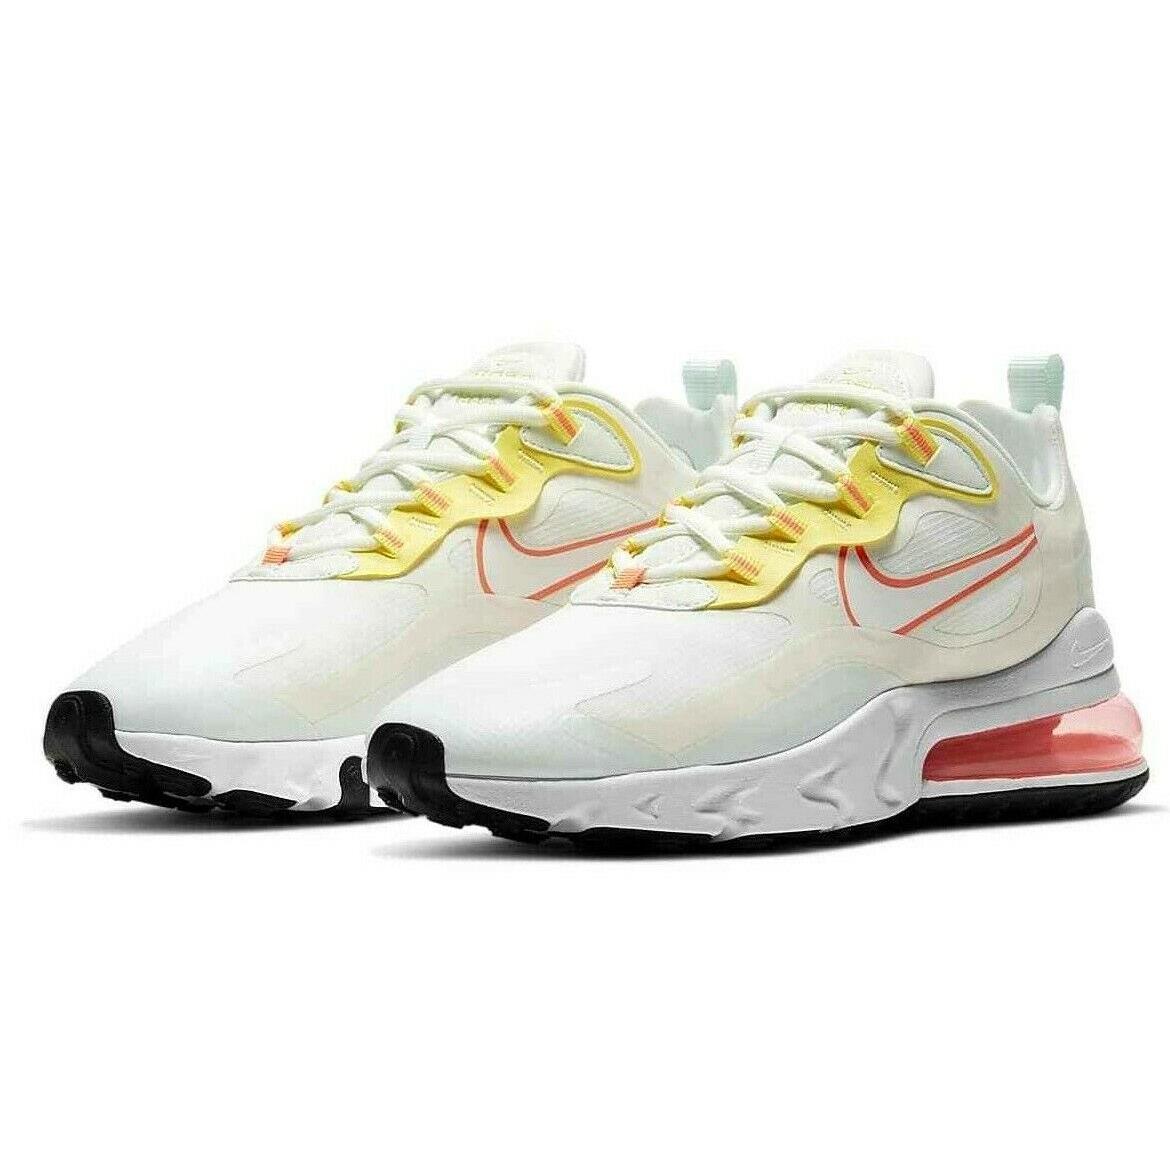 Nike Air Max 270 React Womens Size 6 Sneaker Shoes CV8818 102 Pale Ivory